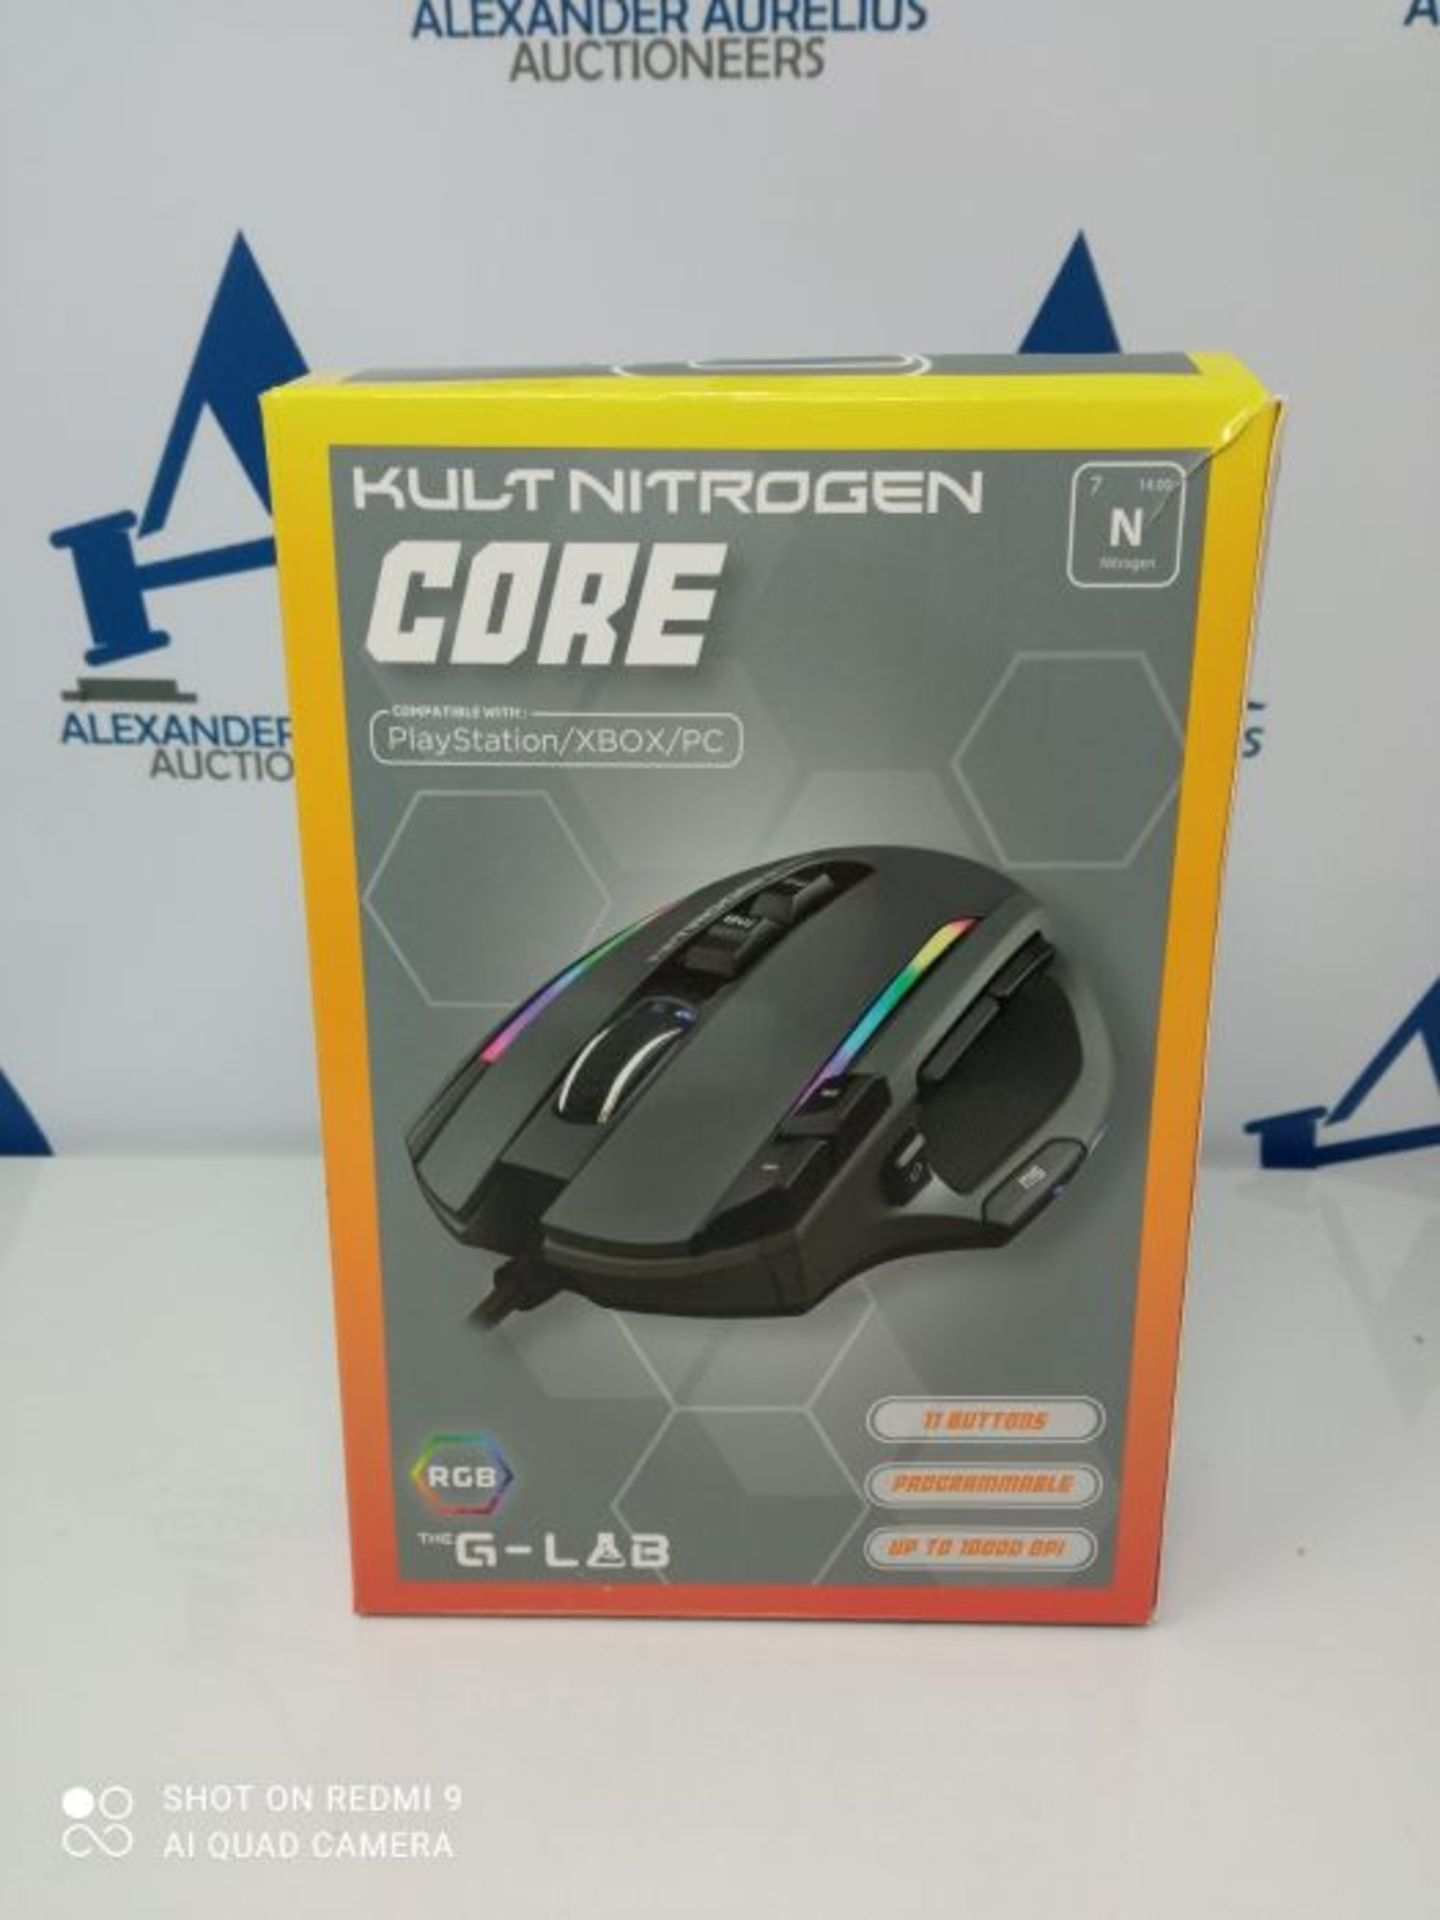 G-LAB Kult NITROGEN Core High Performance Wired Gaming Mouse - Avago 10,000 DPI Optica